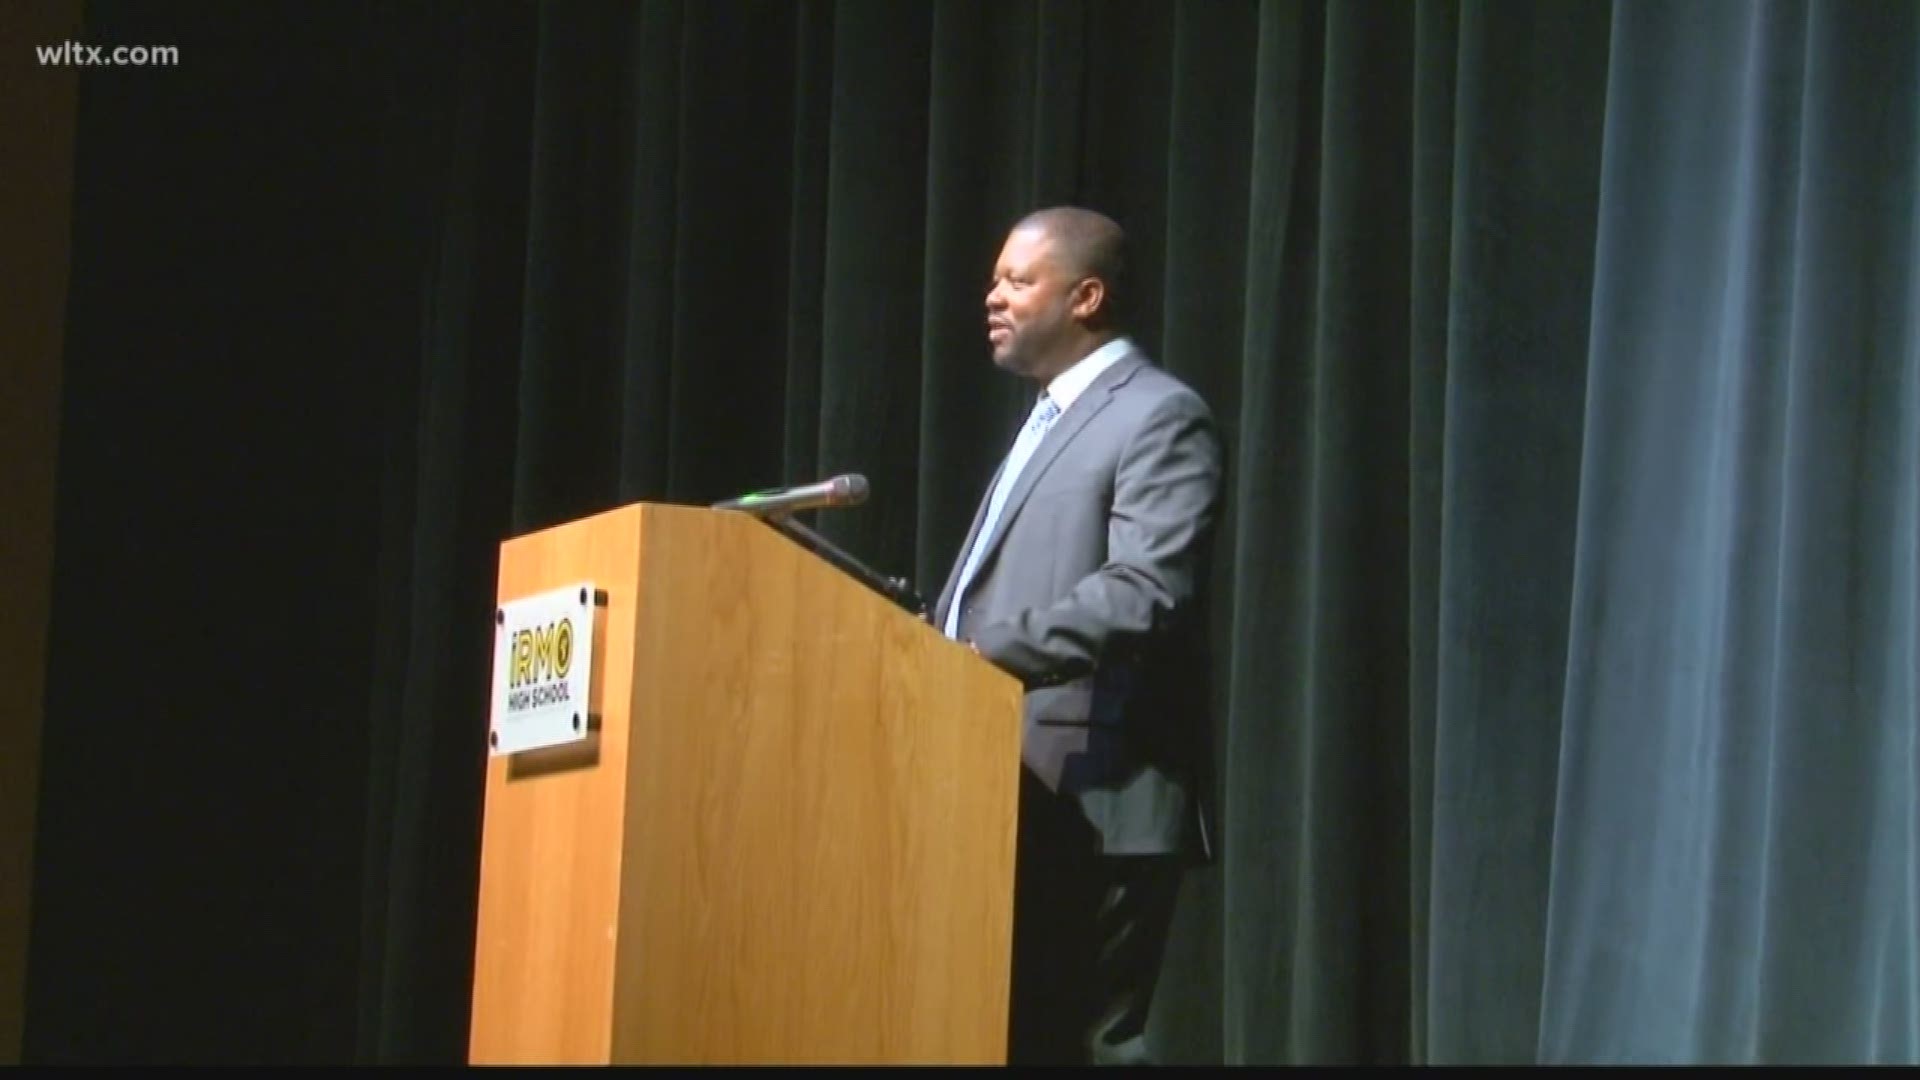 Aaron Brand is formally introduced as the new head football coach at Irmo High School.